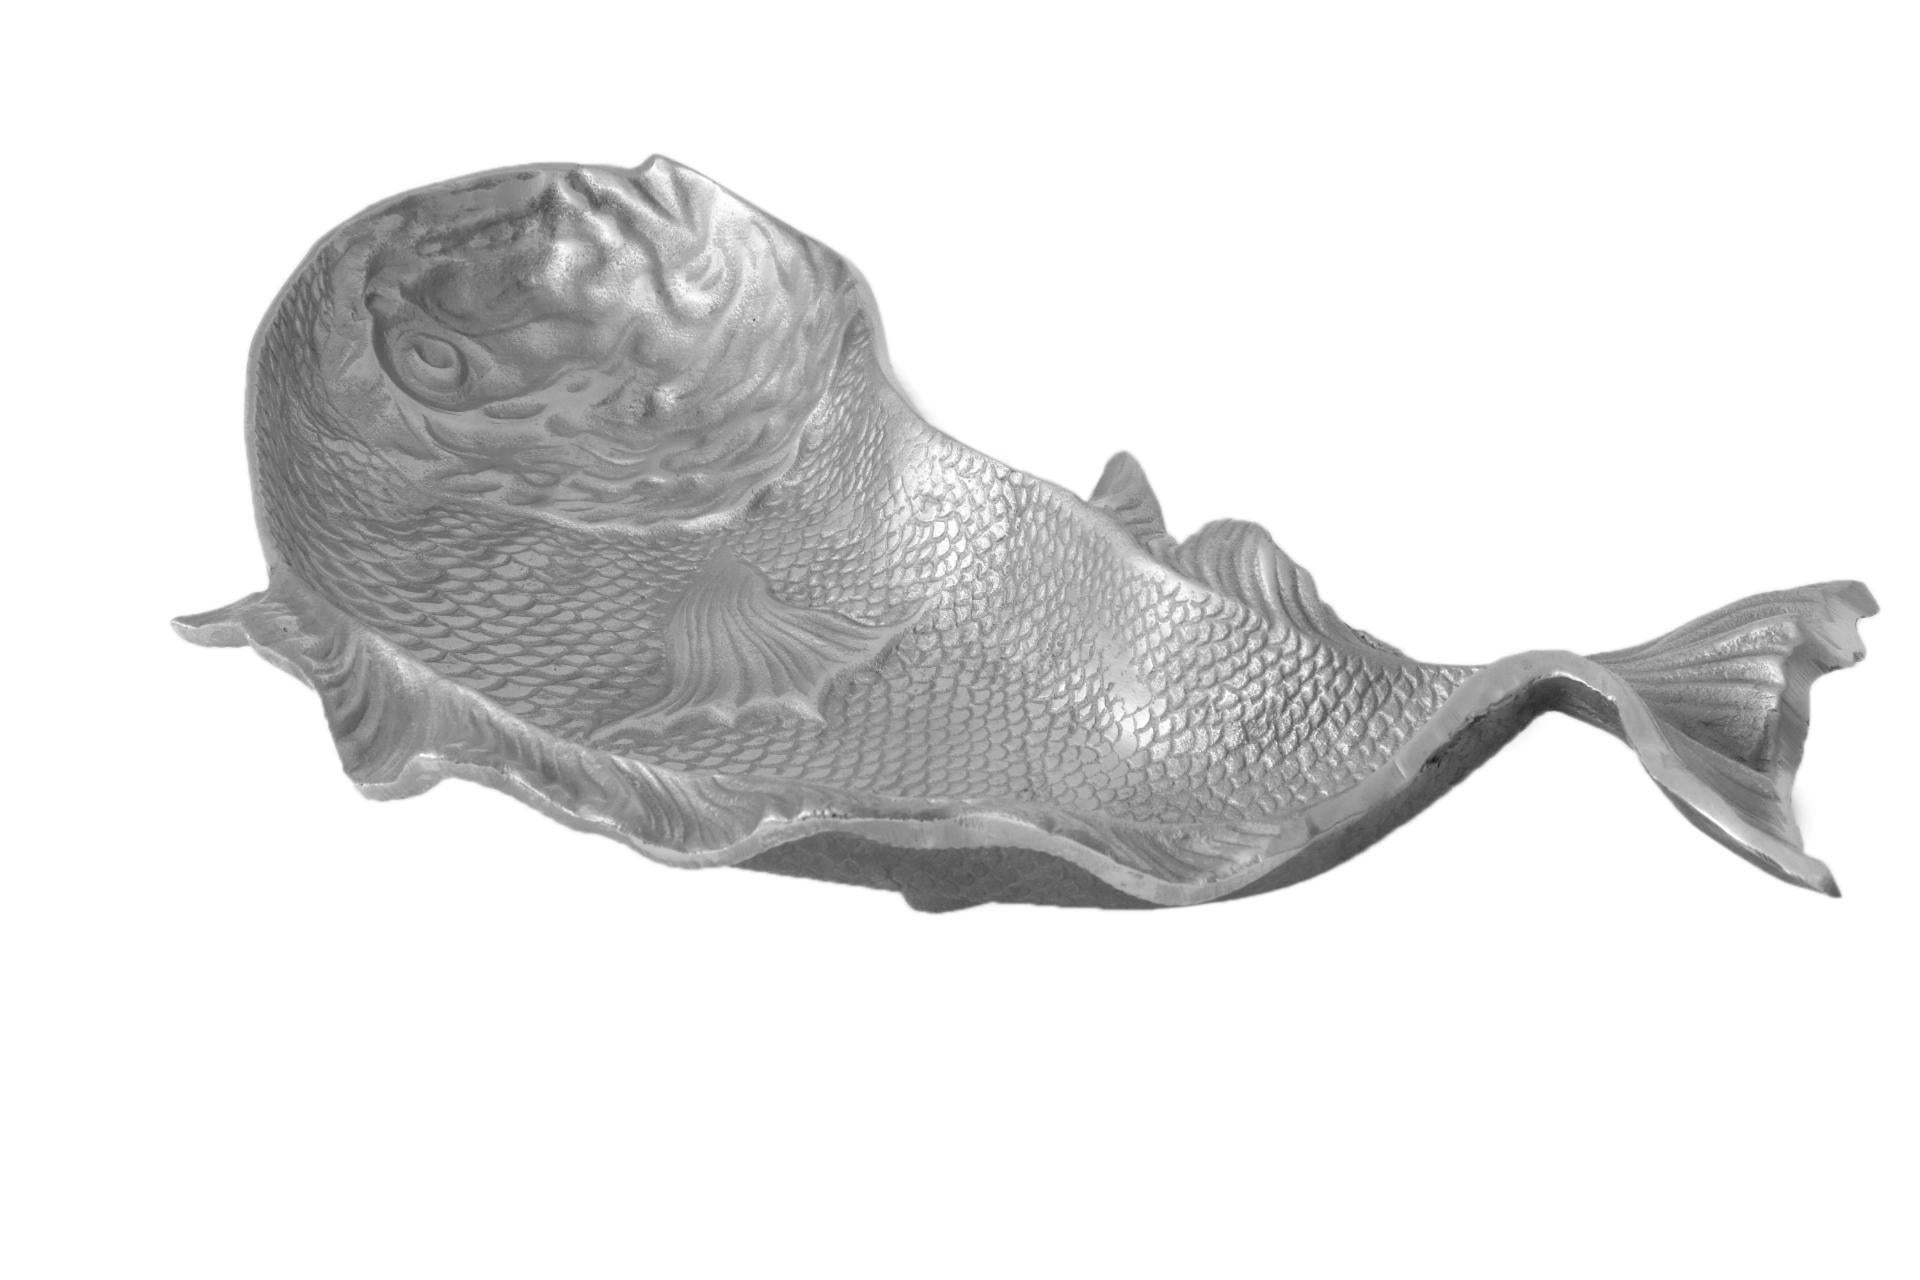 A heavy aluminum platter pressed in the shape of a fish. The eye and mouth are clearly defined and the platter is covered throughout with fine scales. Flowing fins twist at the rim adding movement.